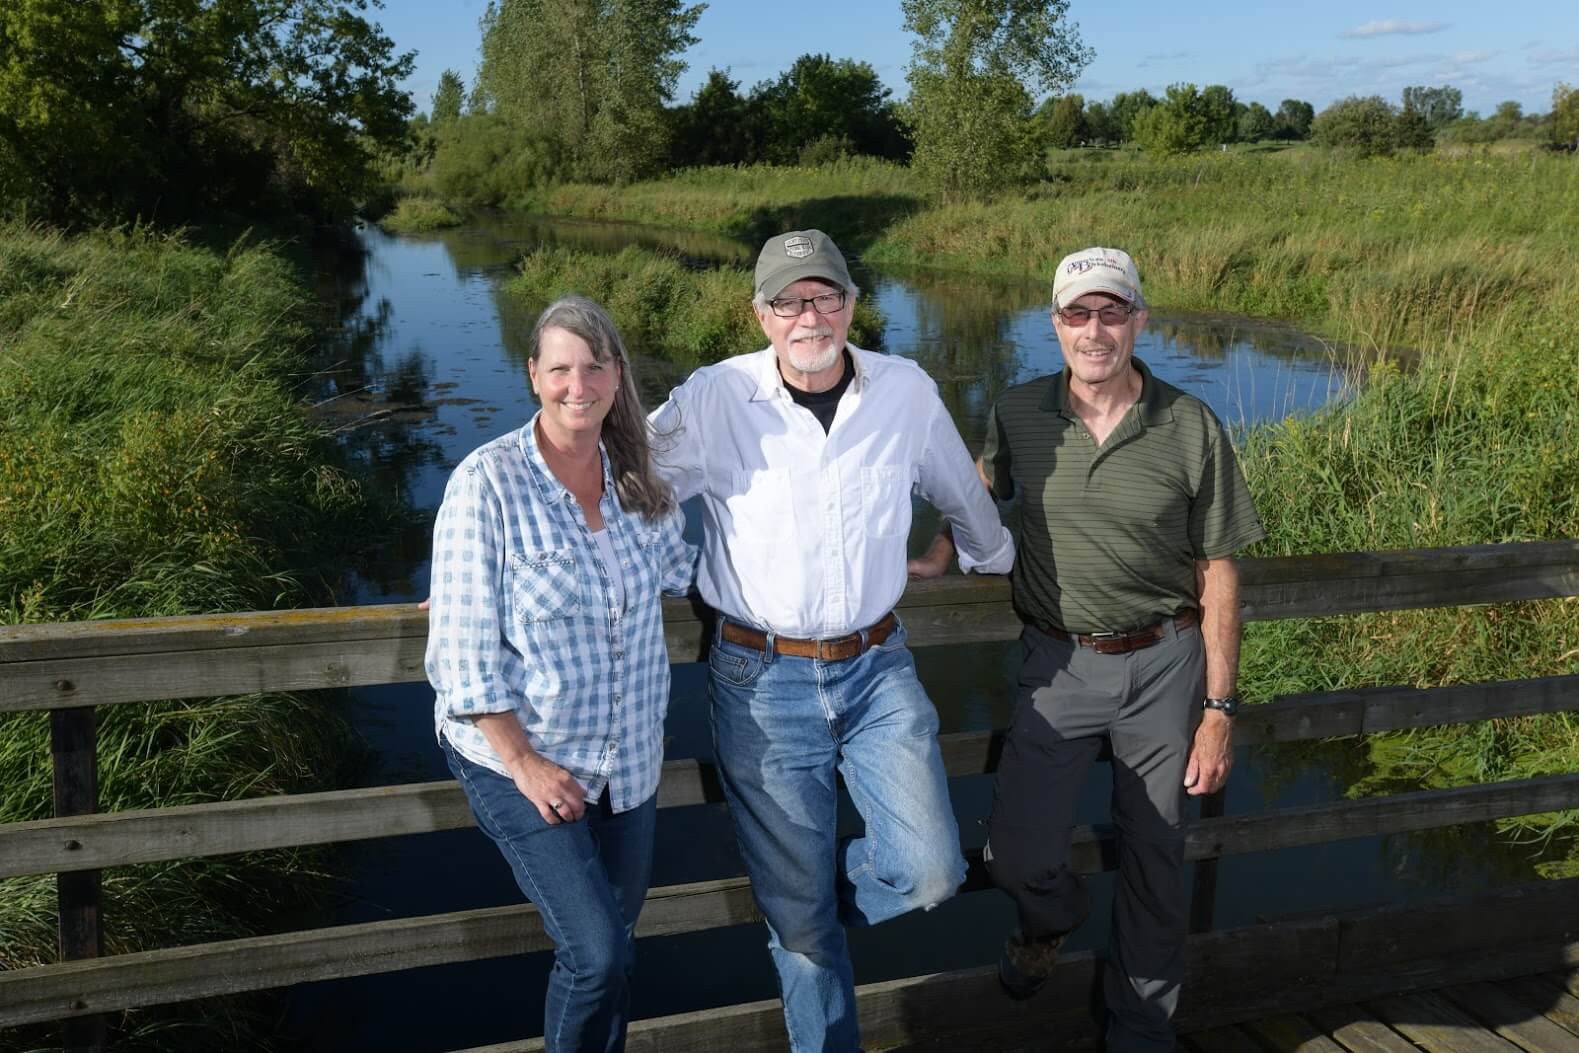 A woman and two men standing on a wooden bridge in front of wetlands.